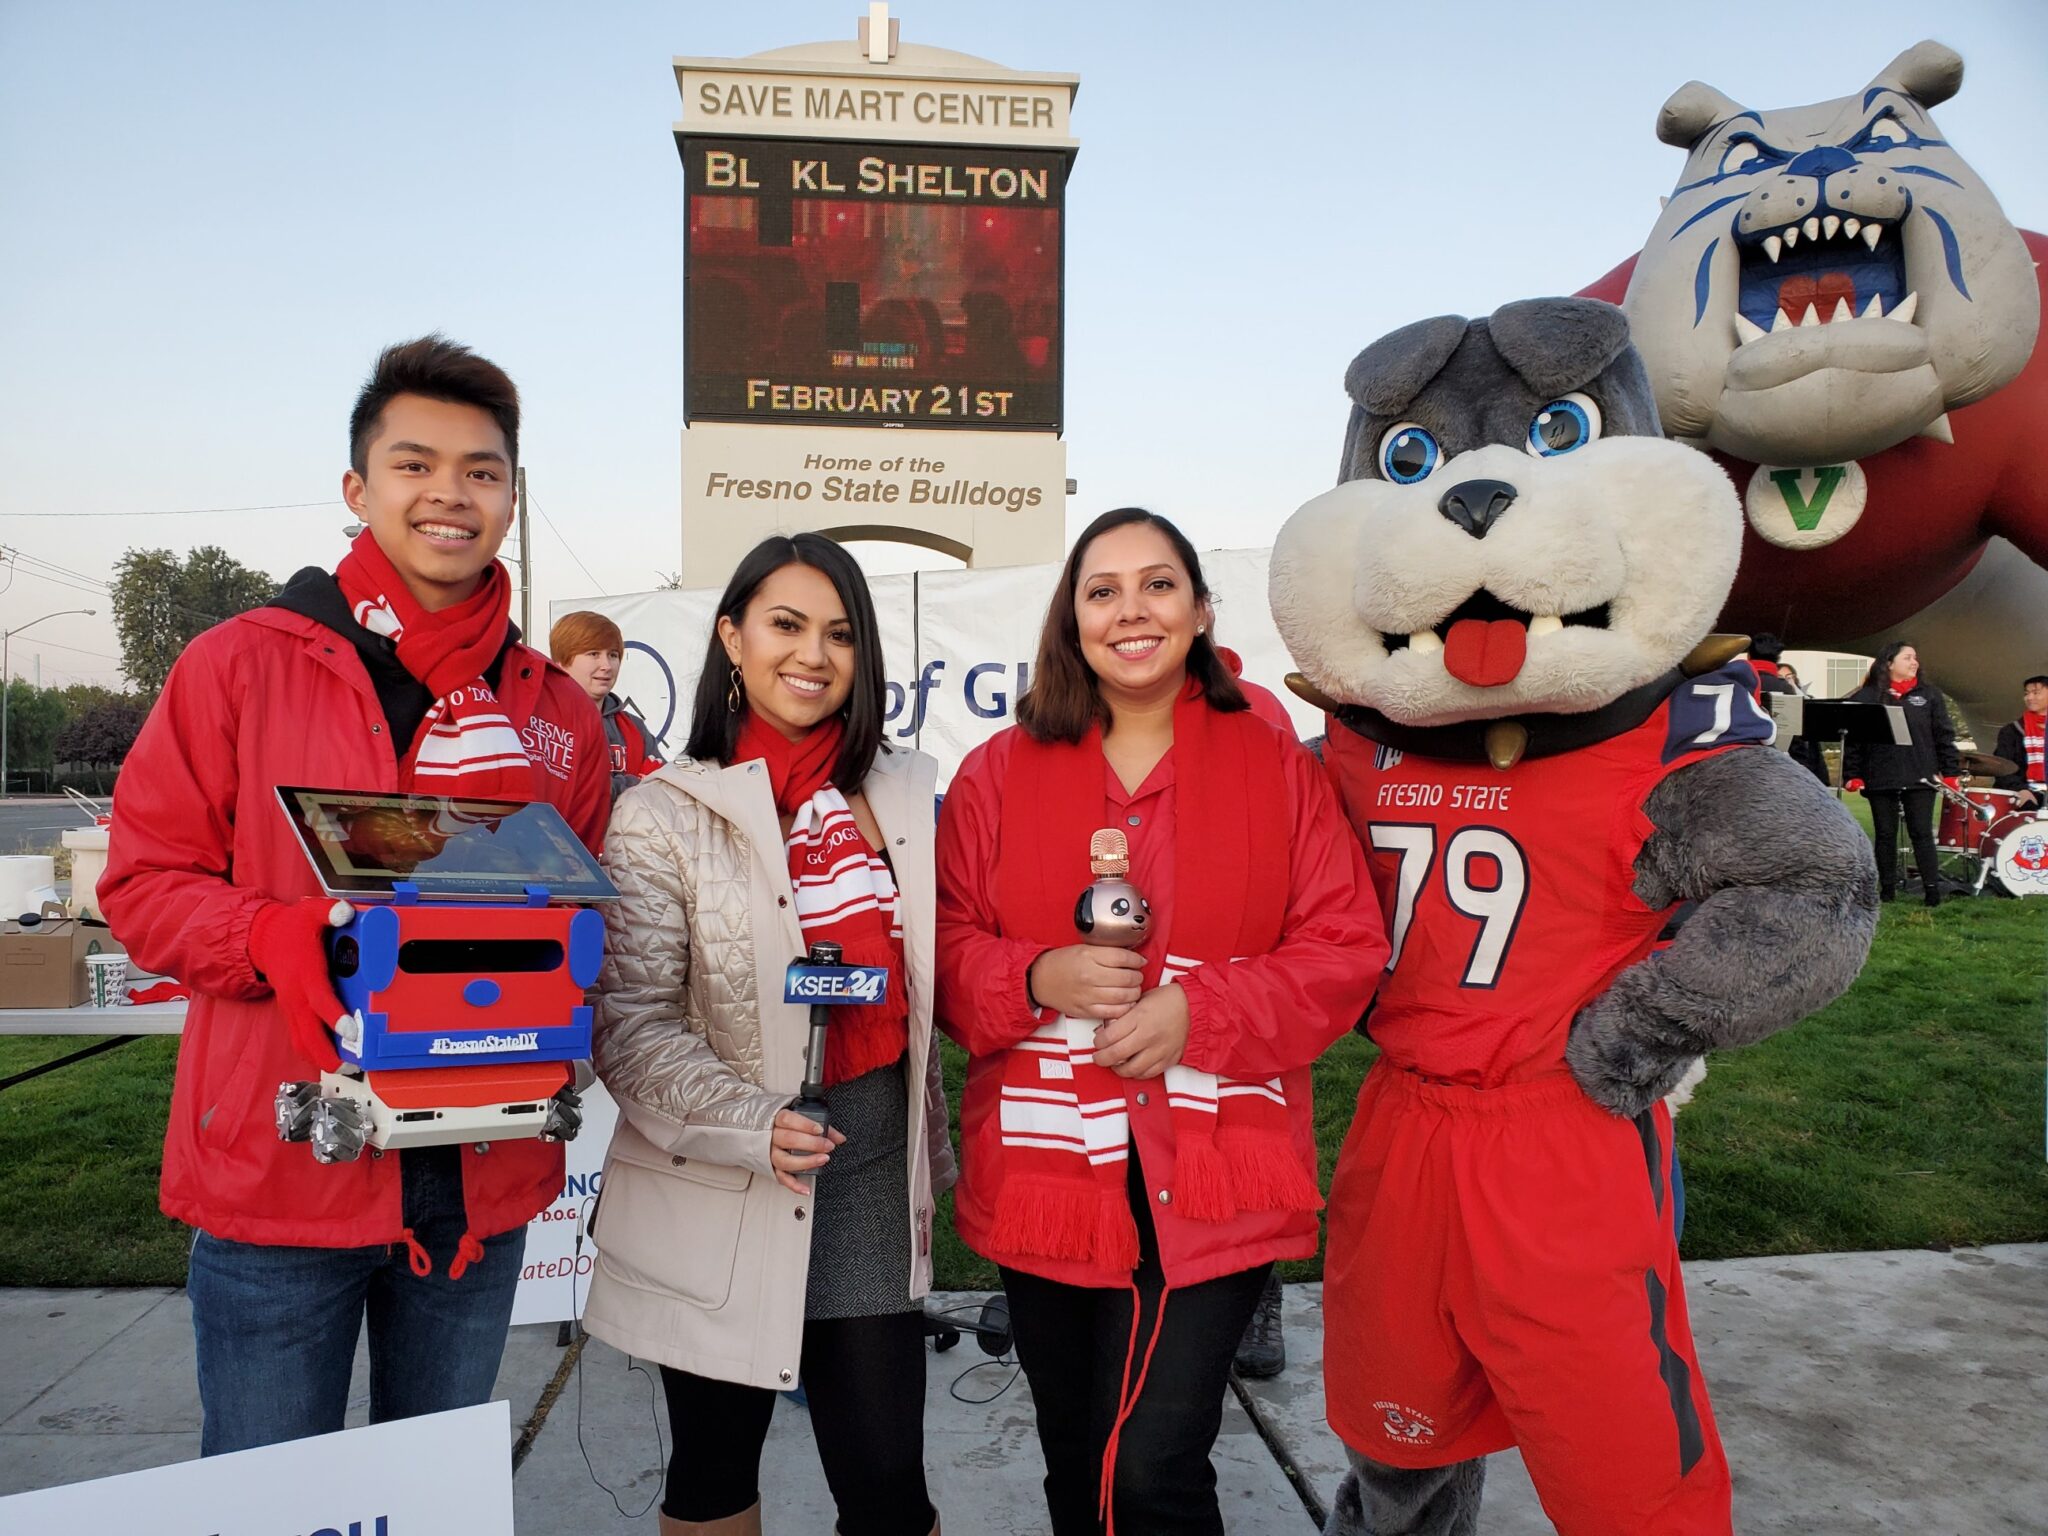 two fresno news anchors, a dxi member holding the bulldog bot and victor the mascot taking a group photo together